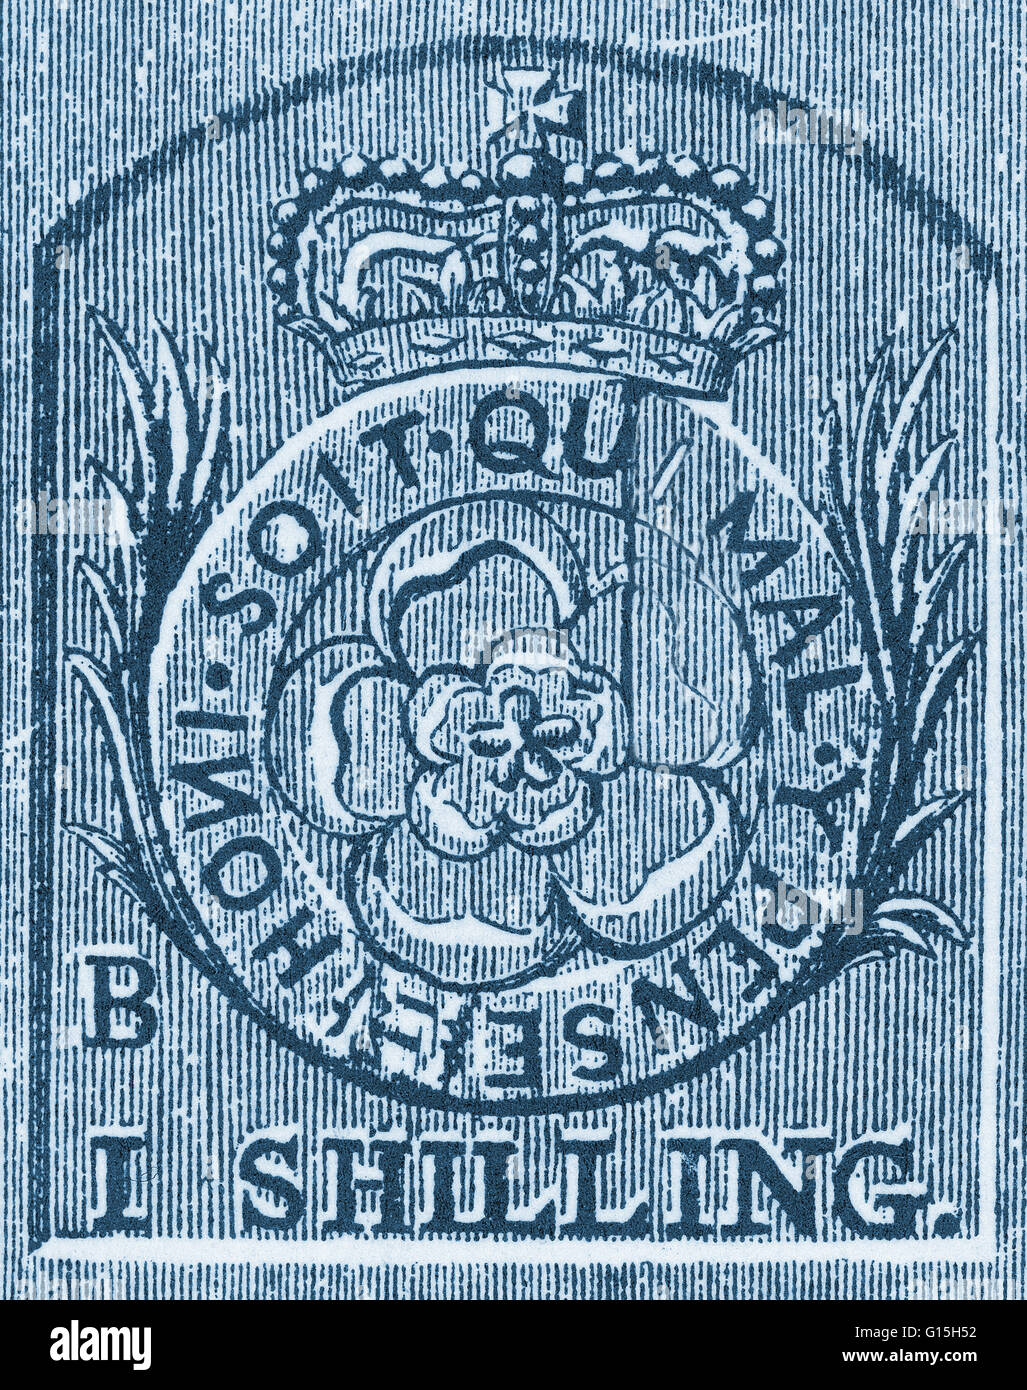 Facsimile of a revenue stamp, introduced into the American colonies with the Stamp Act of 1765. This had to appear on every kind of publication, including legal and commercial papers and licenses. The Stamp Act of 1765 was a tax imposed by the British Par Stock Photo